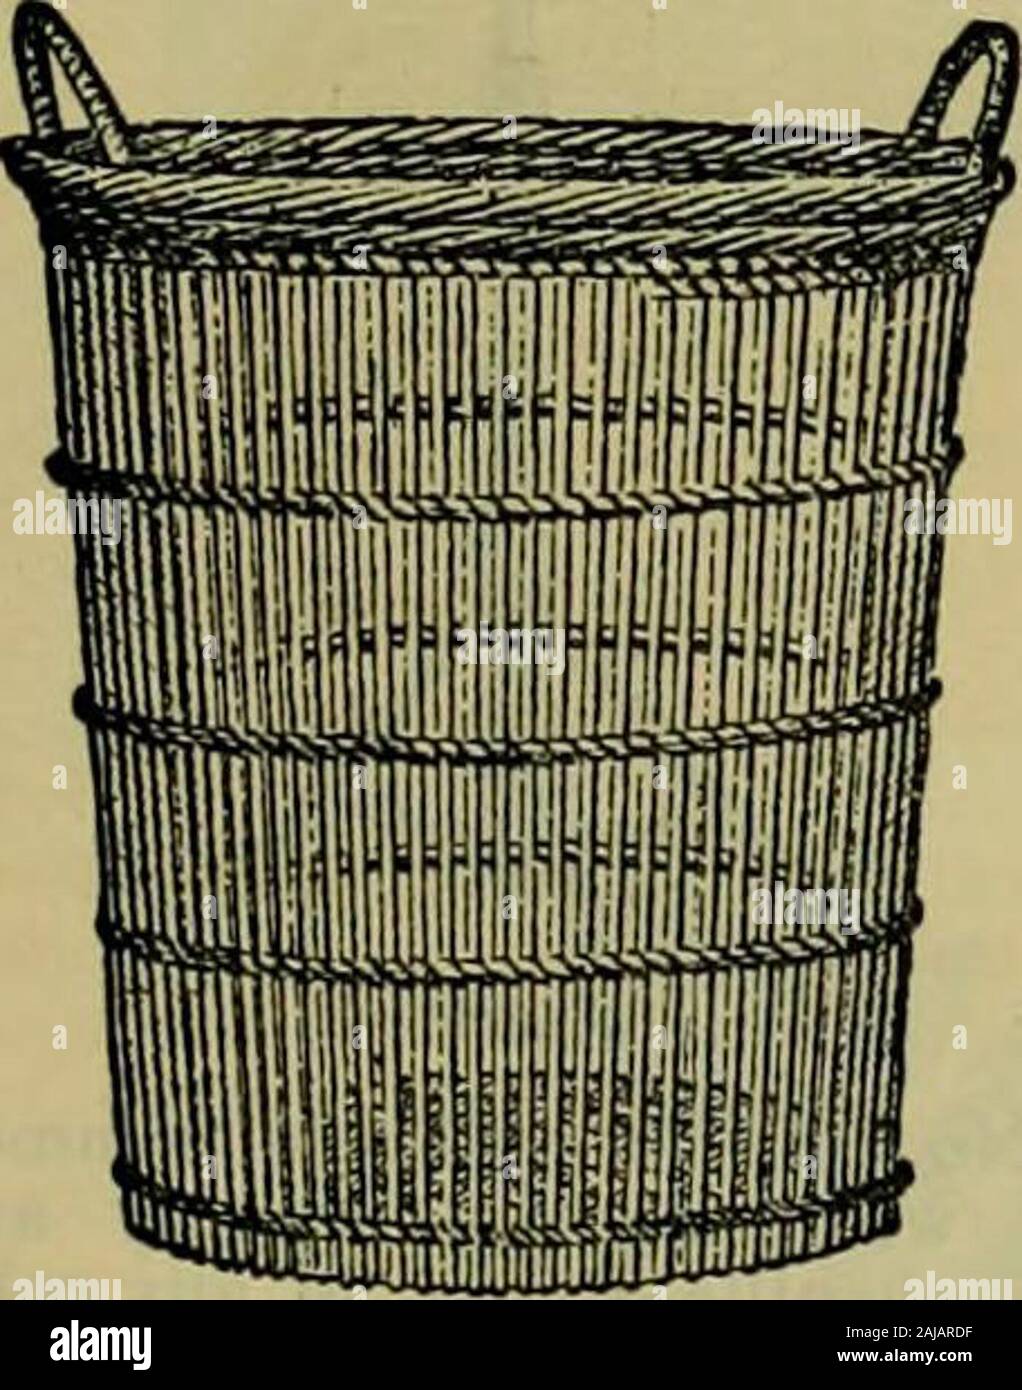 Strawbridge & Clothier's quarterly . No. I.—Catch-Ail Cornucopia, ofwhite straw, with trimmings ofcardinal plush and satin ; price,I3-75-. No. 2.—Wicker Waste Basket, 12inches high, for gilding or trim-ming with bows ; price, 75c. Stock Photo